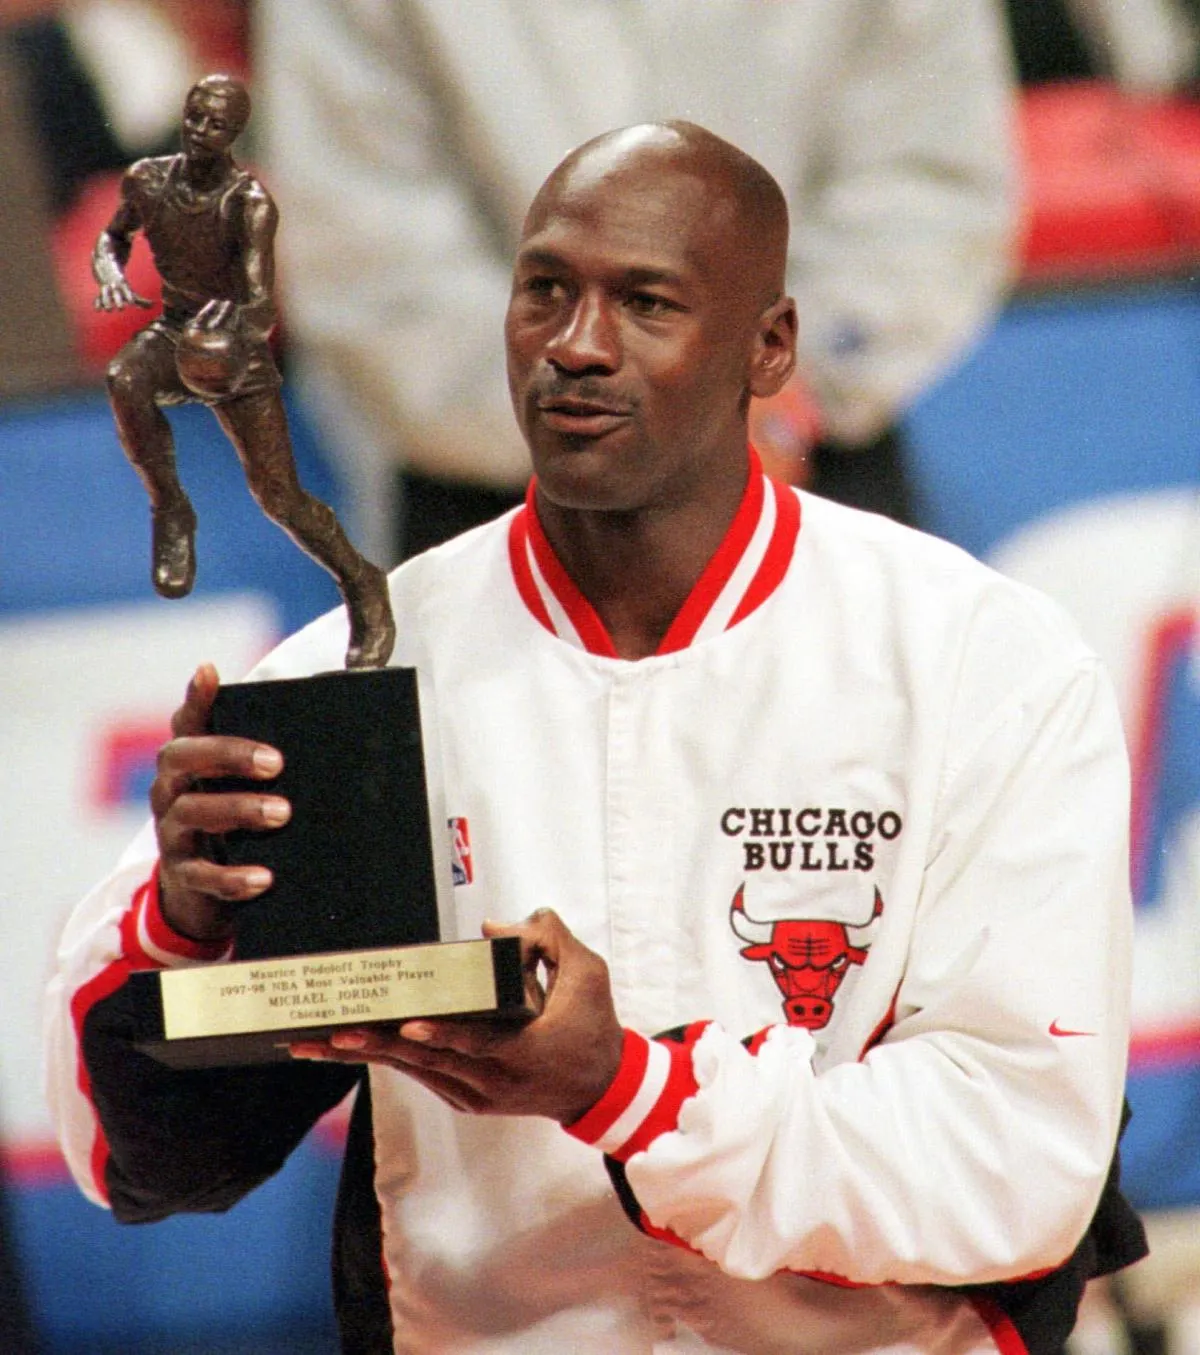 Michael Jordan Shares For The First Time About His Incredible Luck In